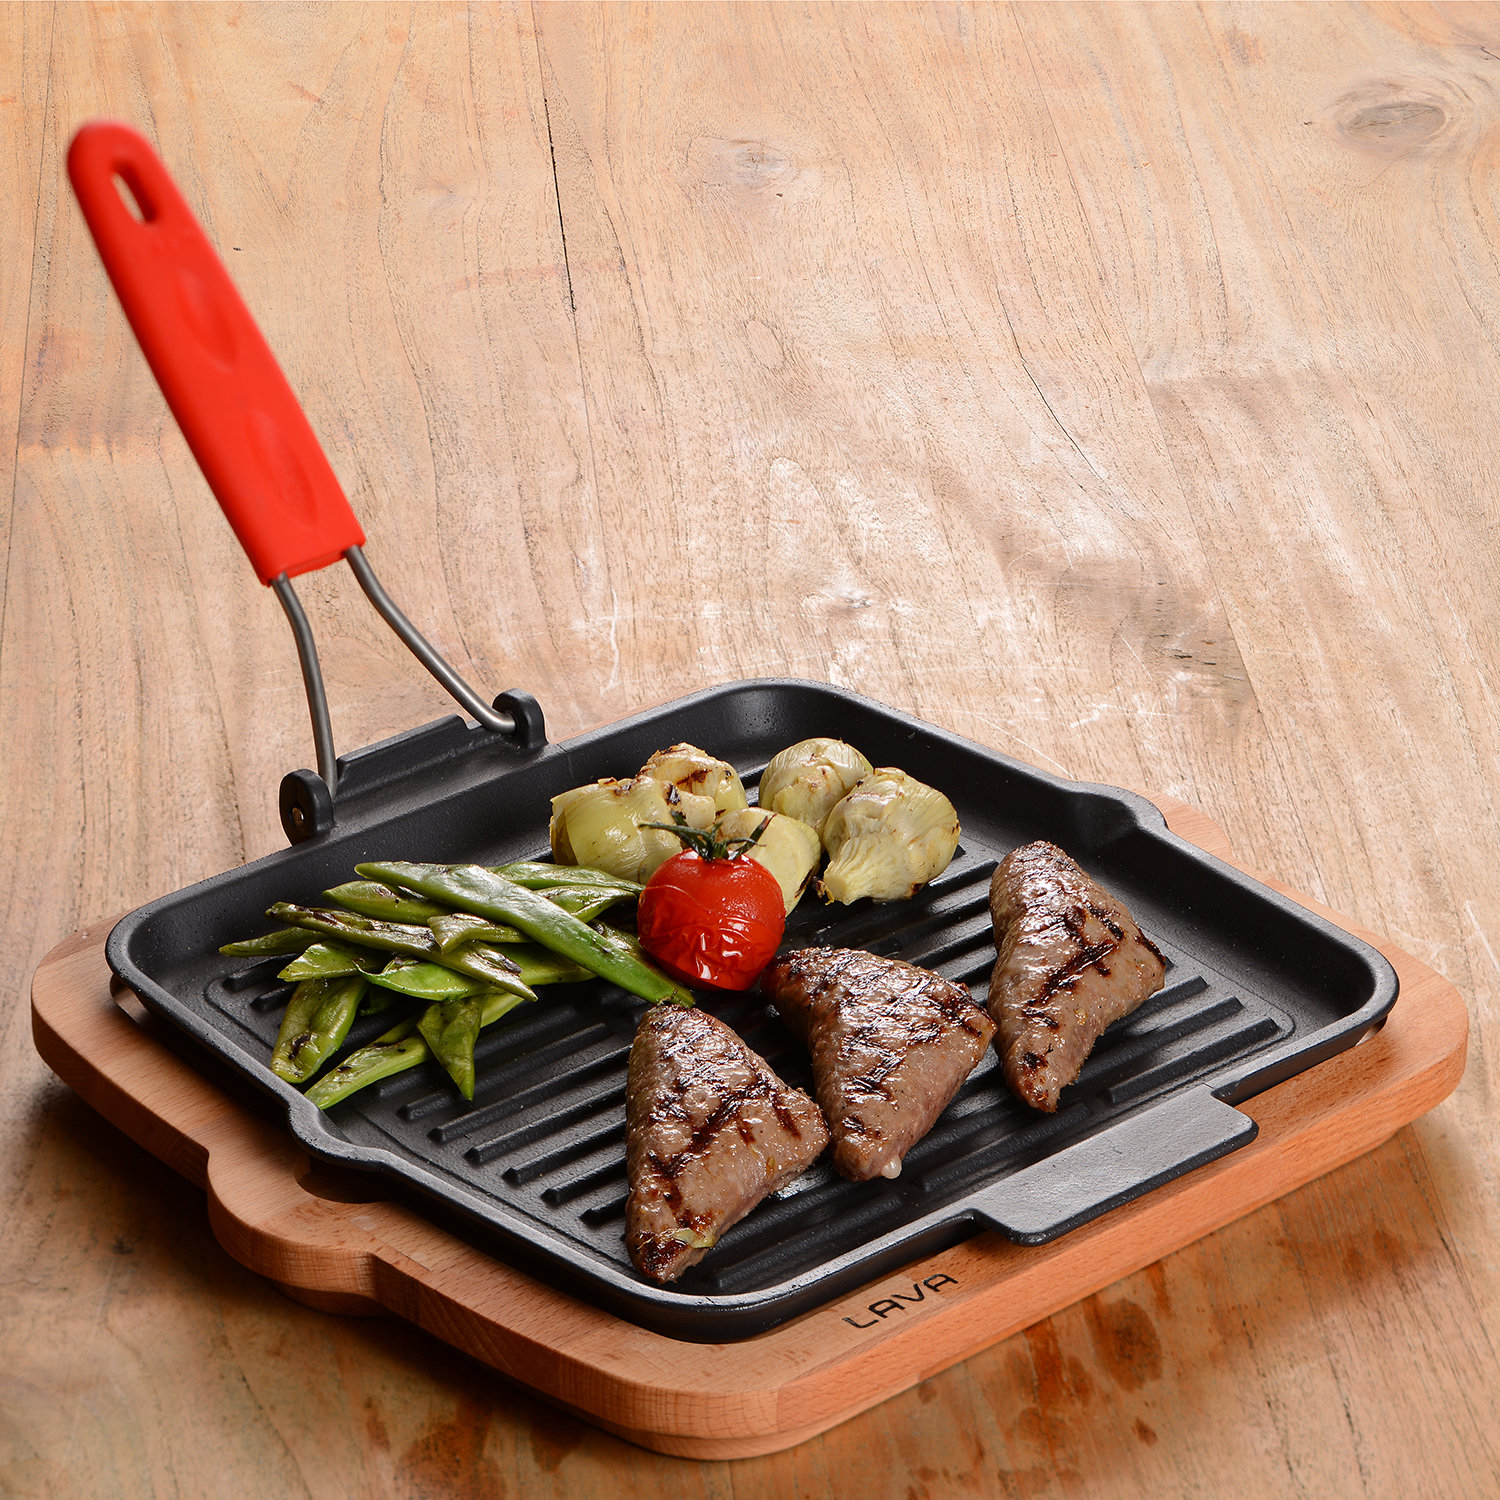 Lava Cast Iron Lava Enameled Cast Iron Mini Grill Pan 6 inch-Square with Beechwood Service Platter LV Eco P GT 1616 K4